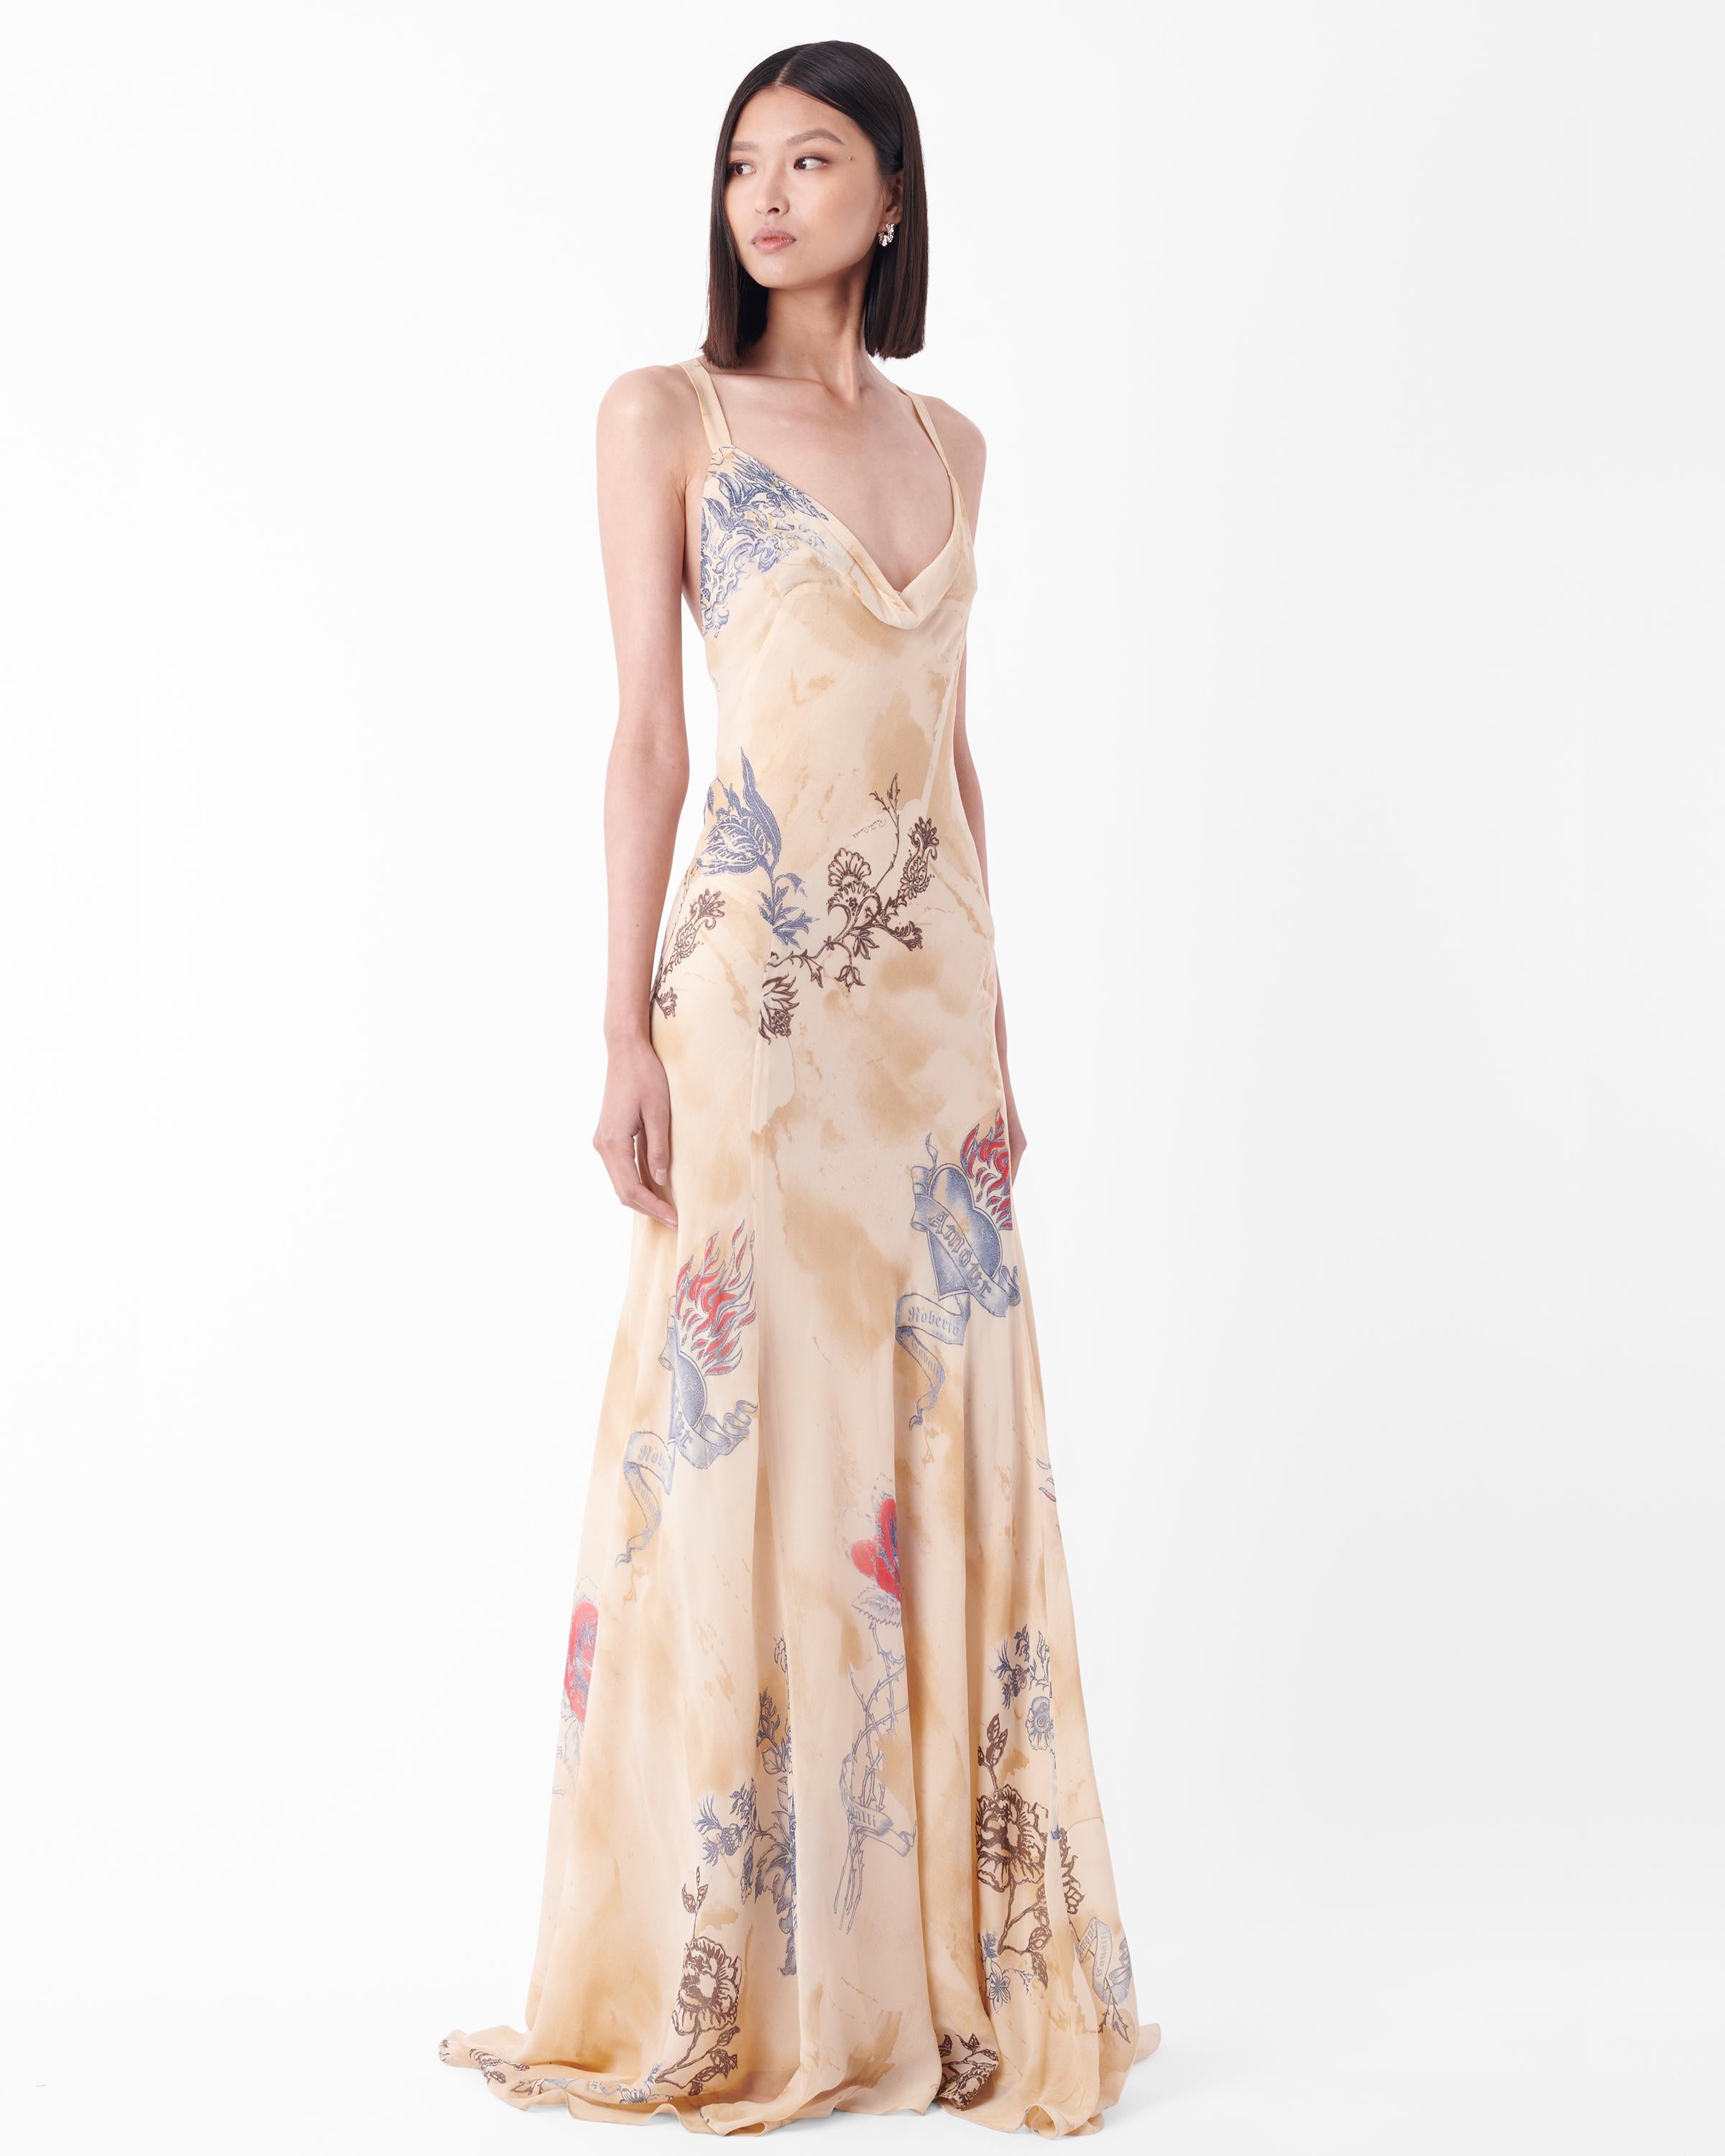 Vintage S/S 2003 Runway Tattoo Backless Silk Gown In Excellent Condition For Sale In London, GB